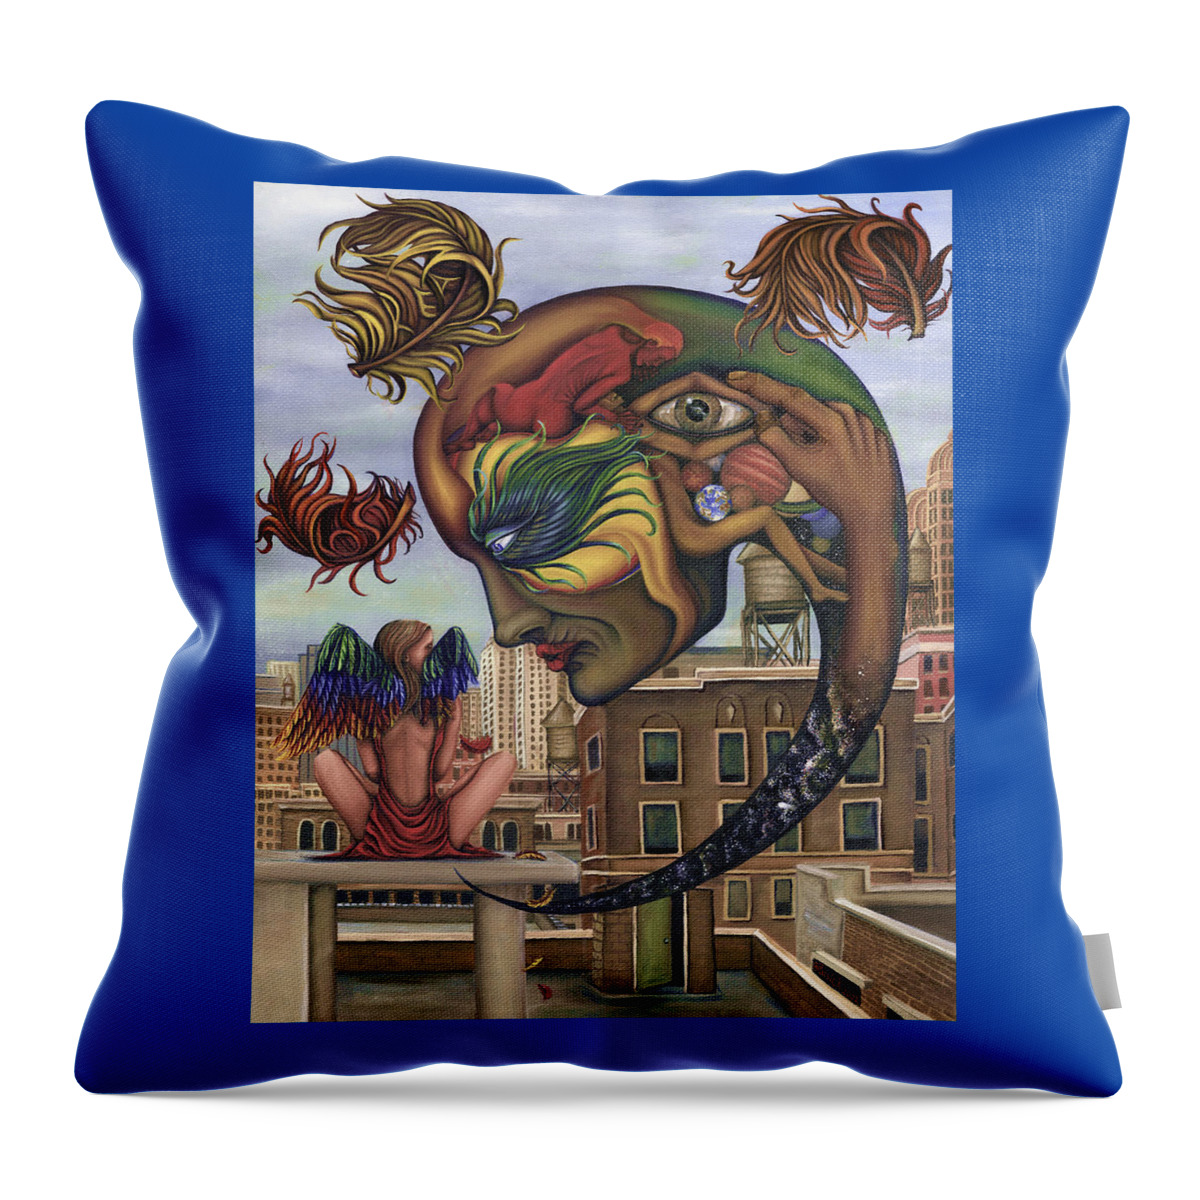 Oil Throw Pillow featuring the painting Dreams Lost The Molting by Karen Musick